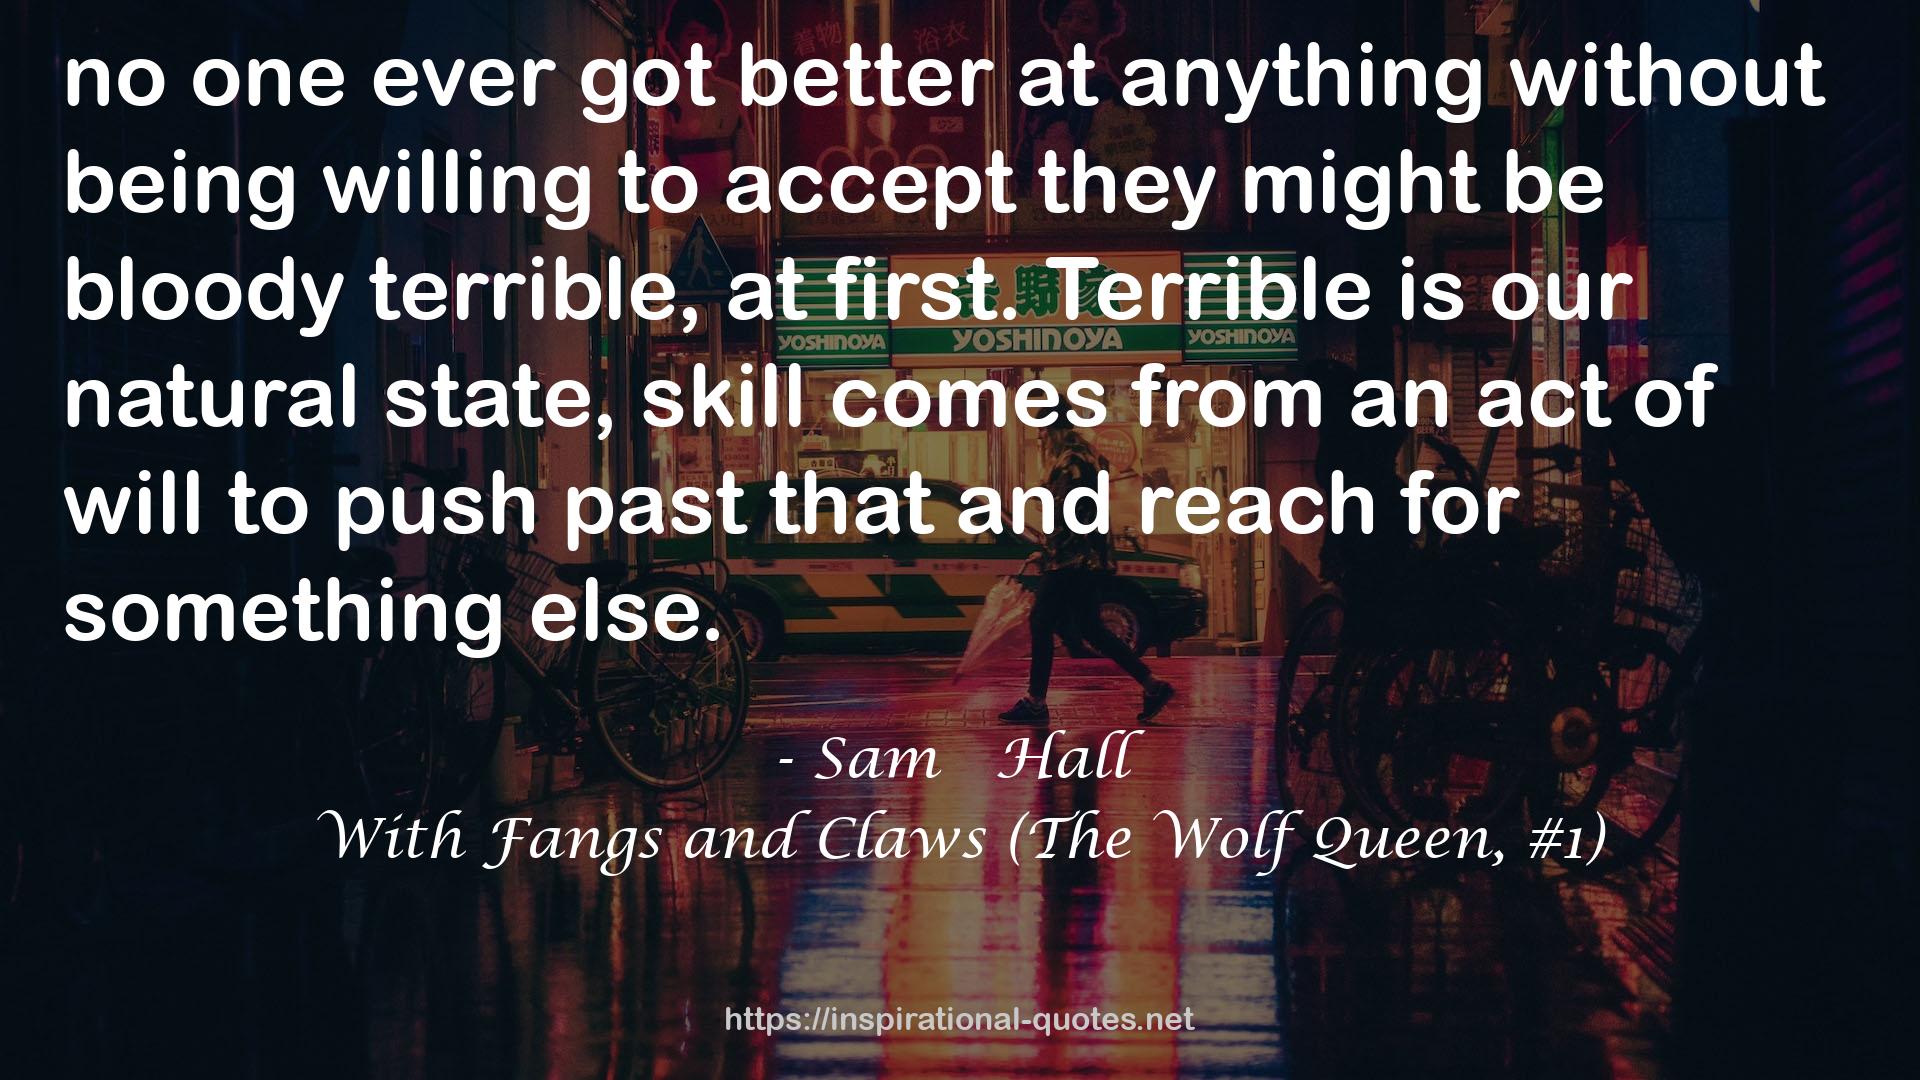 With Fangs and Claws (The Wolf Queen, #1) QUOTES